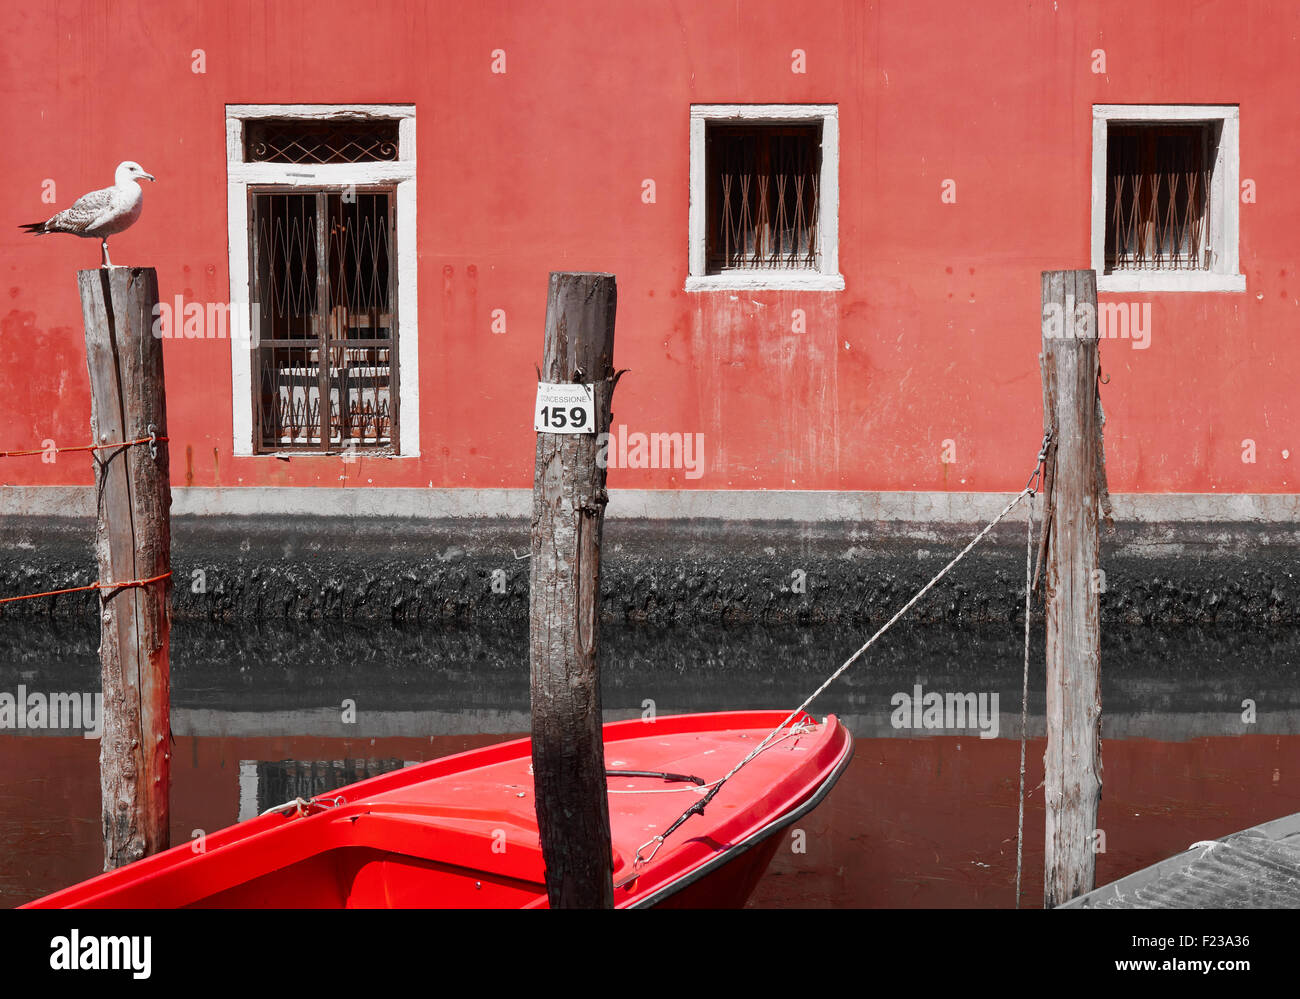 Canalside scene with wooden mooring poles (palina) seagull and small red boat Chioggia Venetian Lagoon Veneto Italy Europe Stock Photo